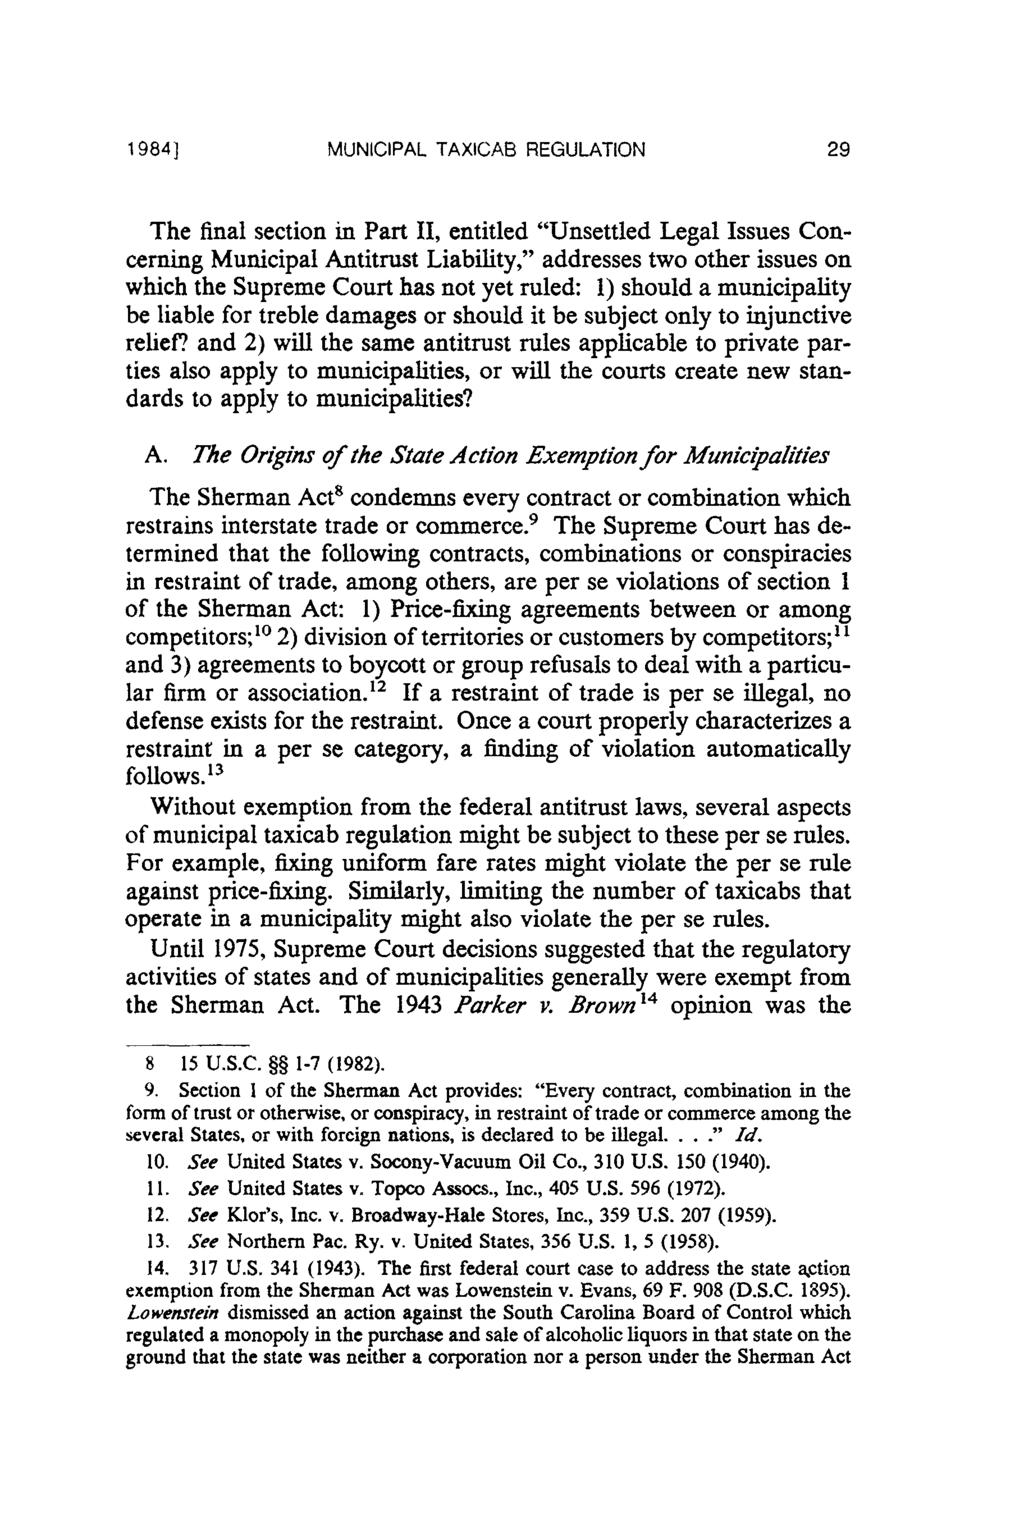 1 984] MUNICIPAL TAXICAB REGULATION The final section in Part II, entitled "Unsettled Legal Issues Concerning Municipal Antitrust Liability," addresses two other issues on which the Supreme Court has